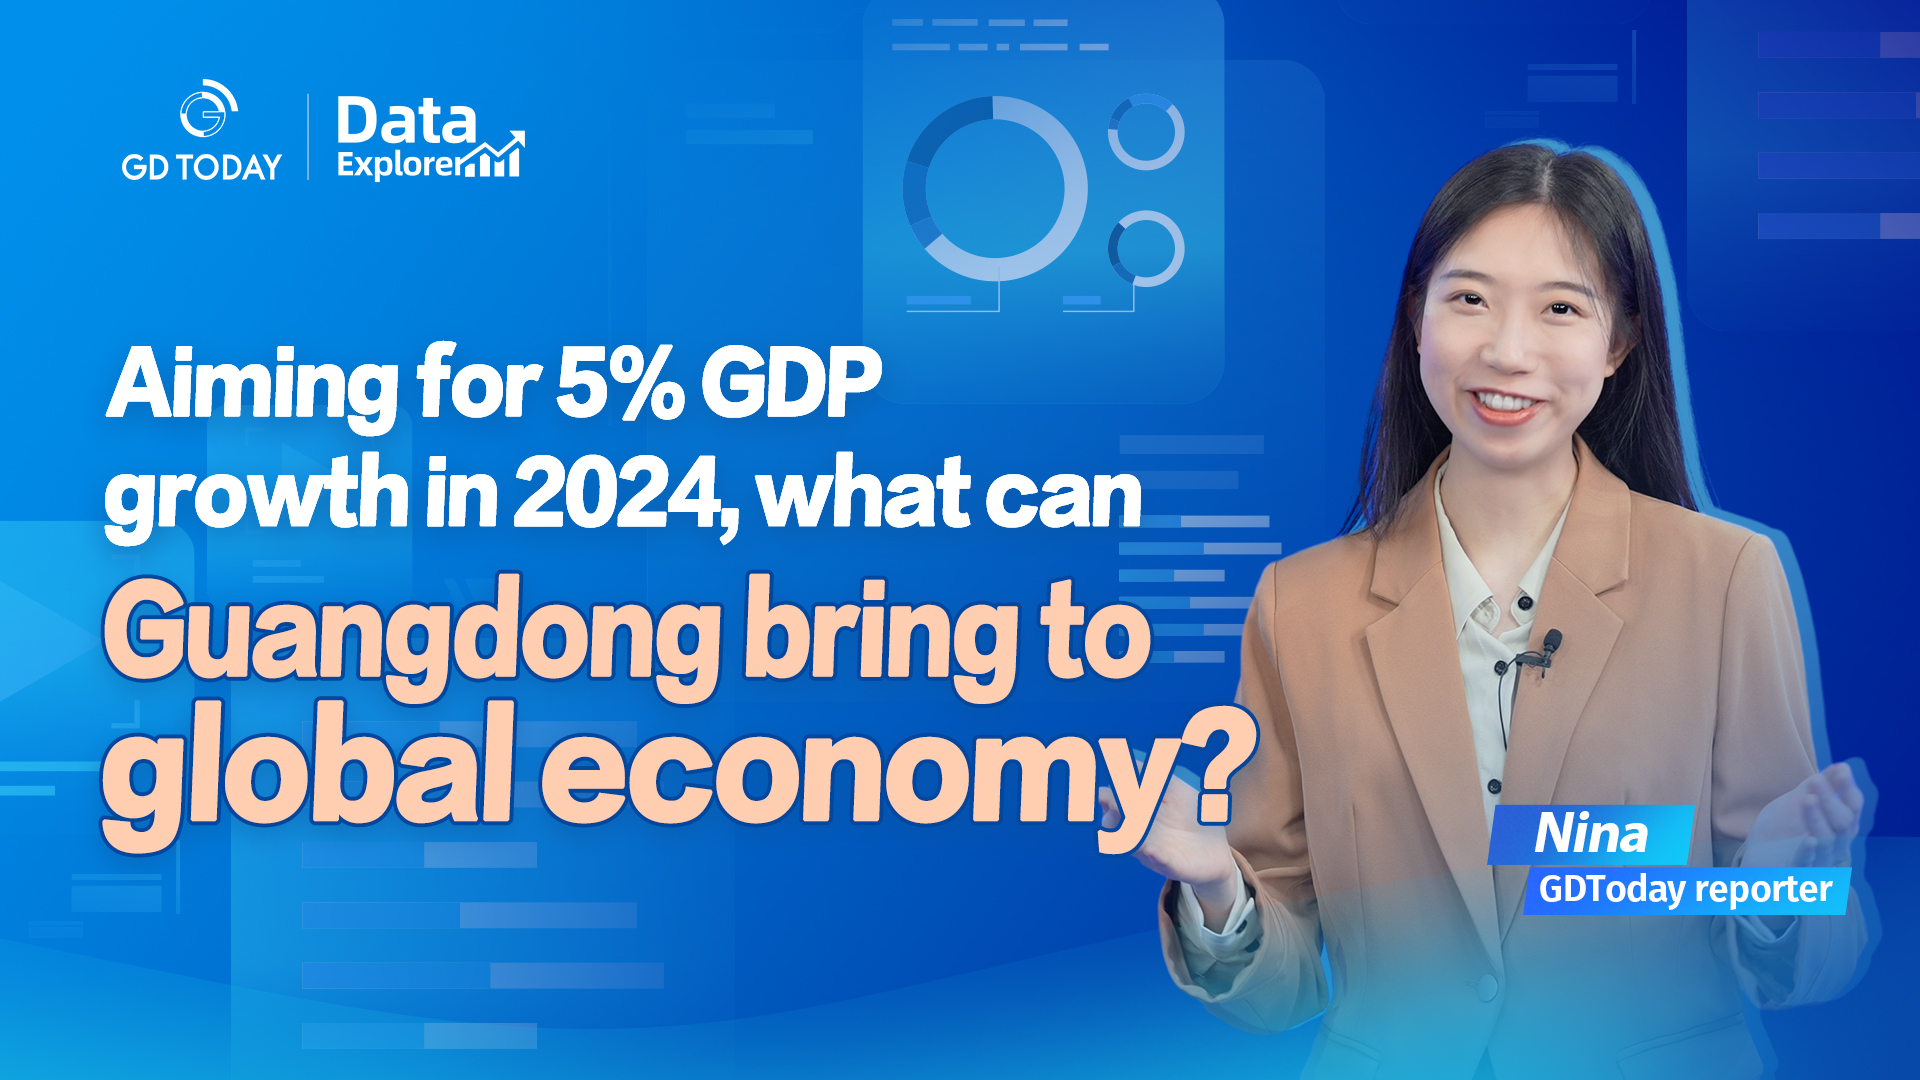 Data Explorer | Aiming for 5% GDP growth in 2024, what can Guangdong bring to the global economy?